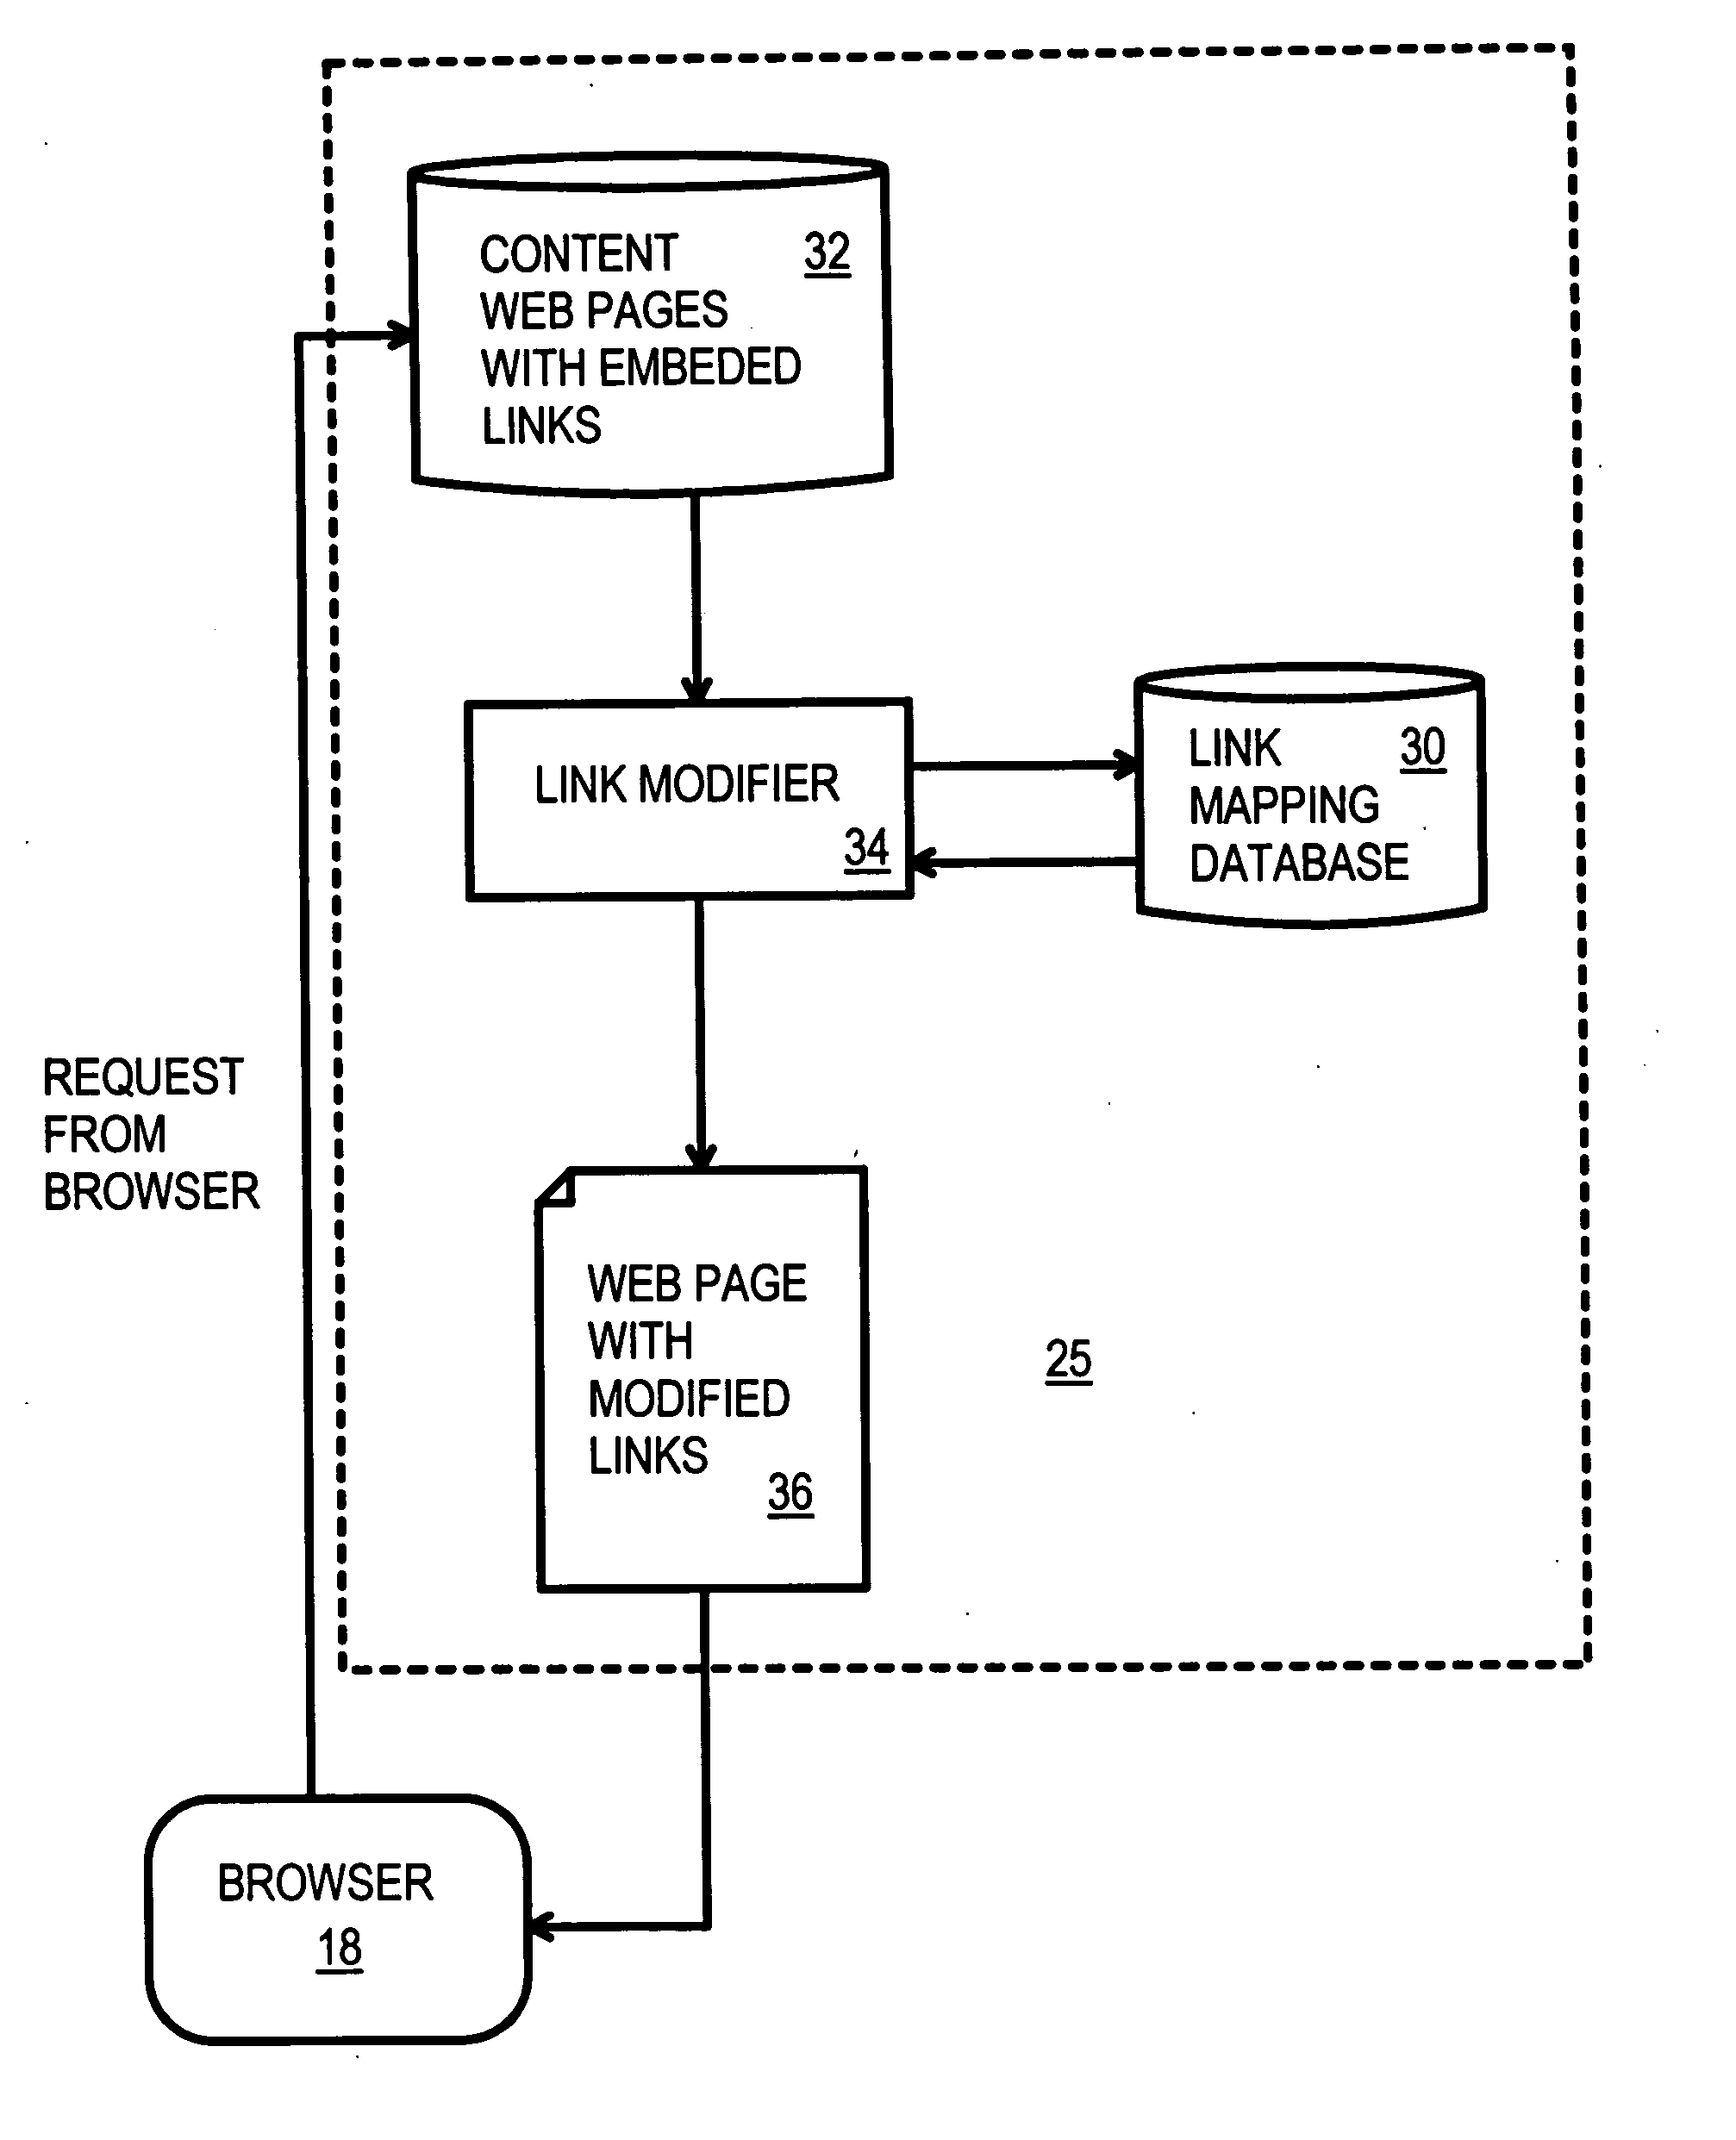 Automatic selection of content-delivery provider using link mapping database